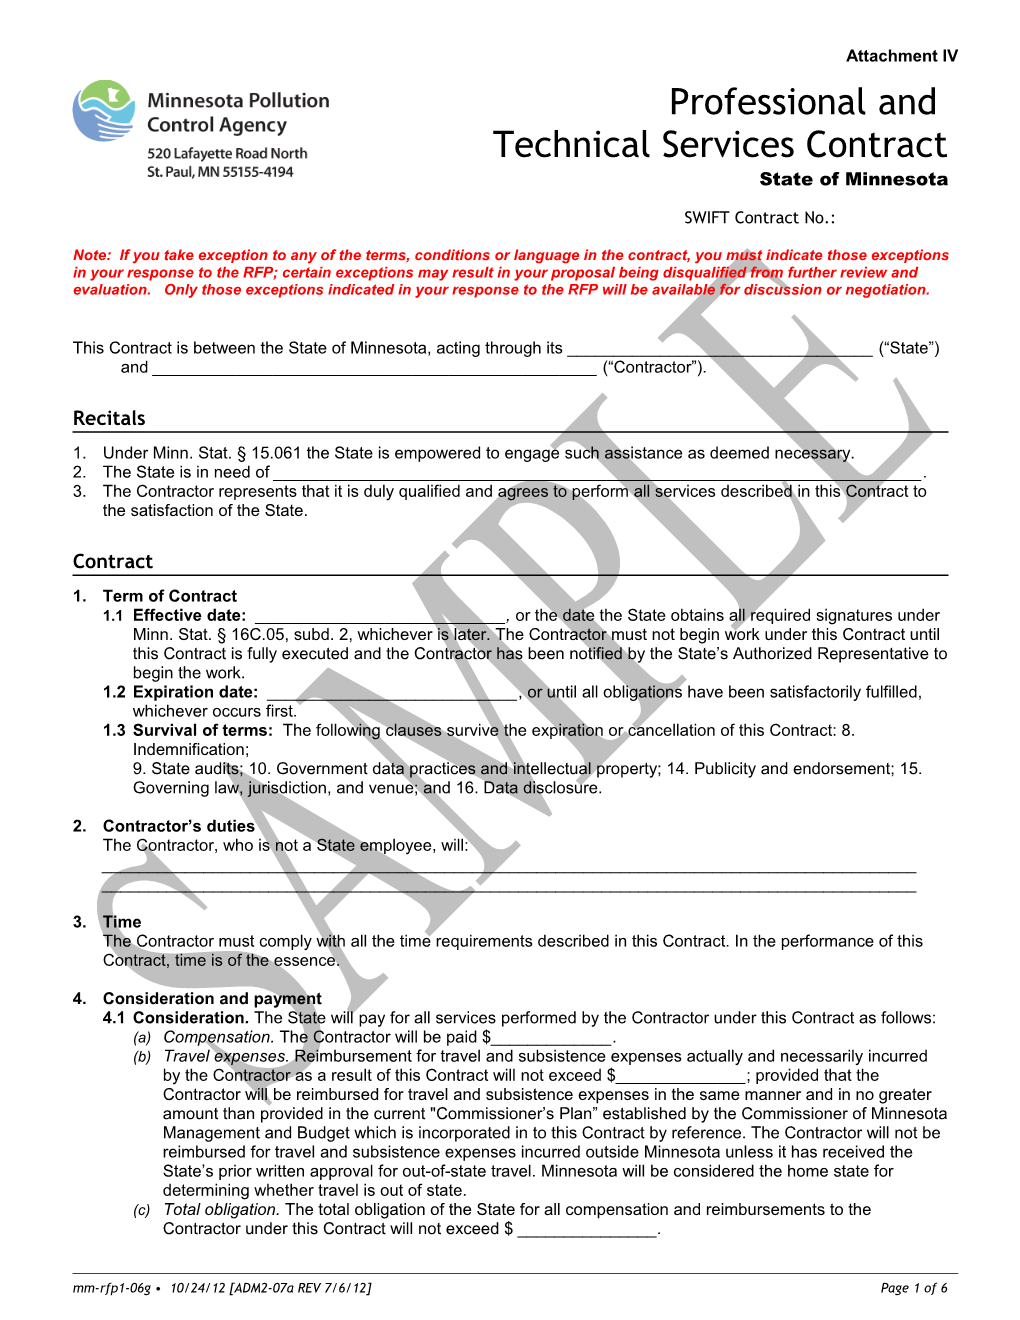 Attachment IV - Professional and Technical Services Contract - Template